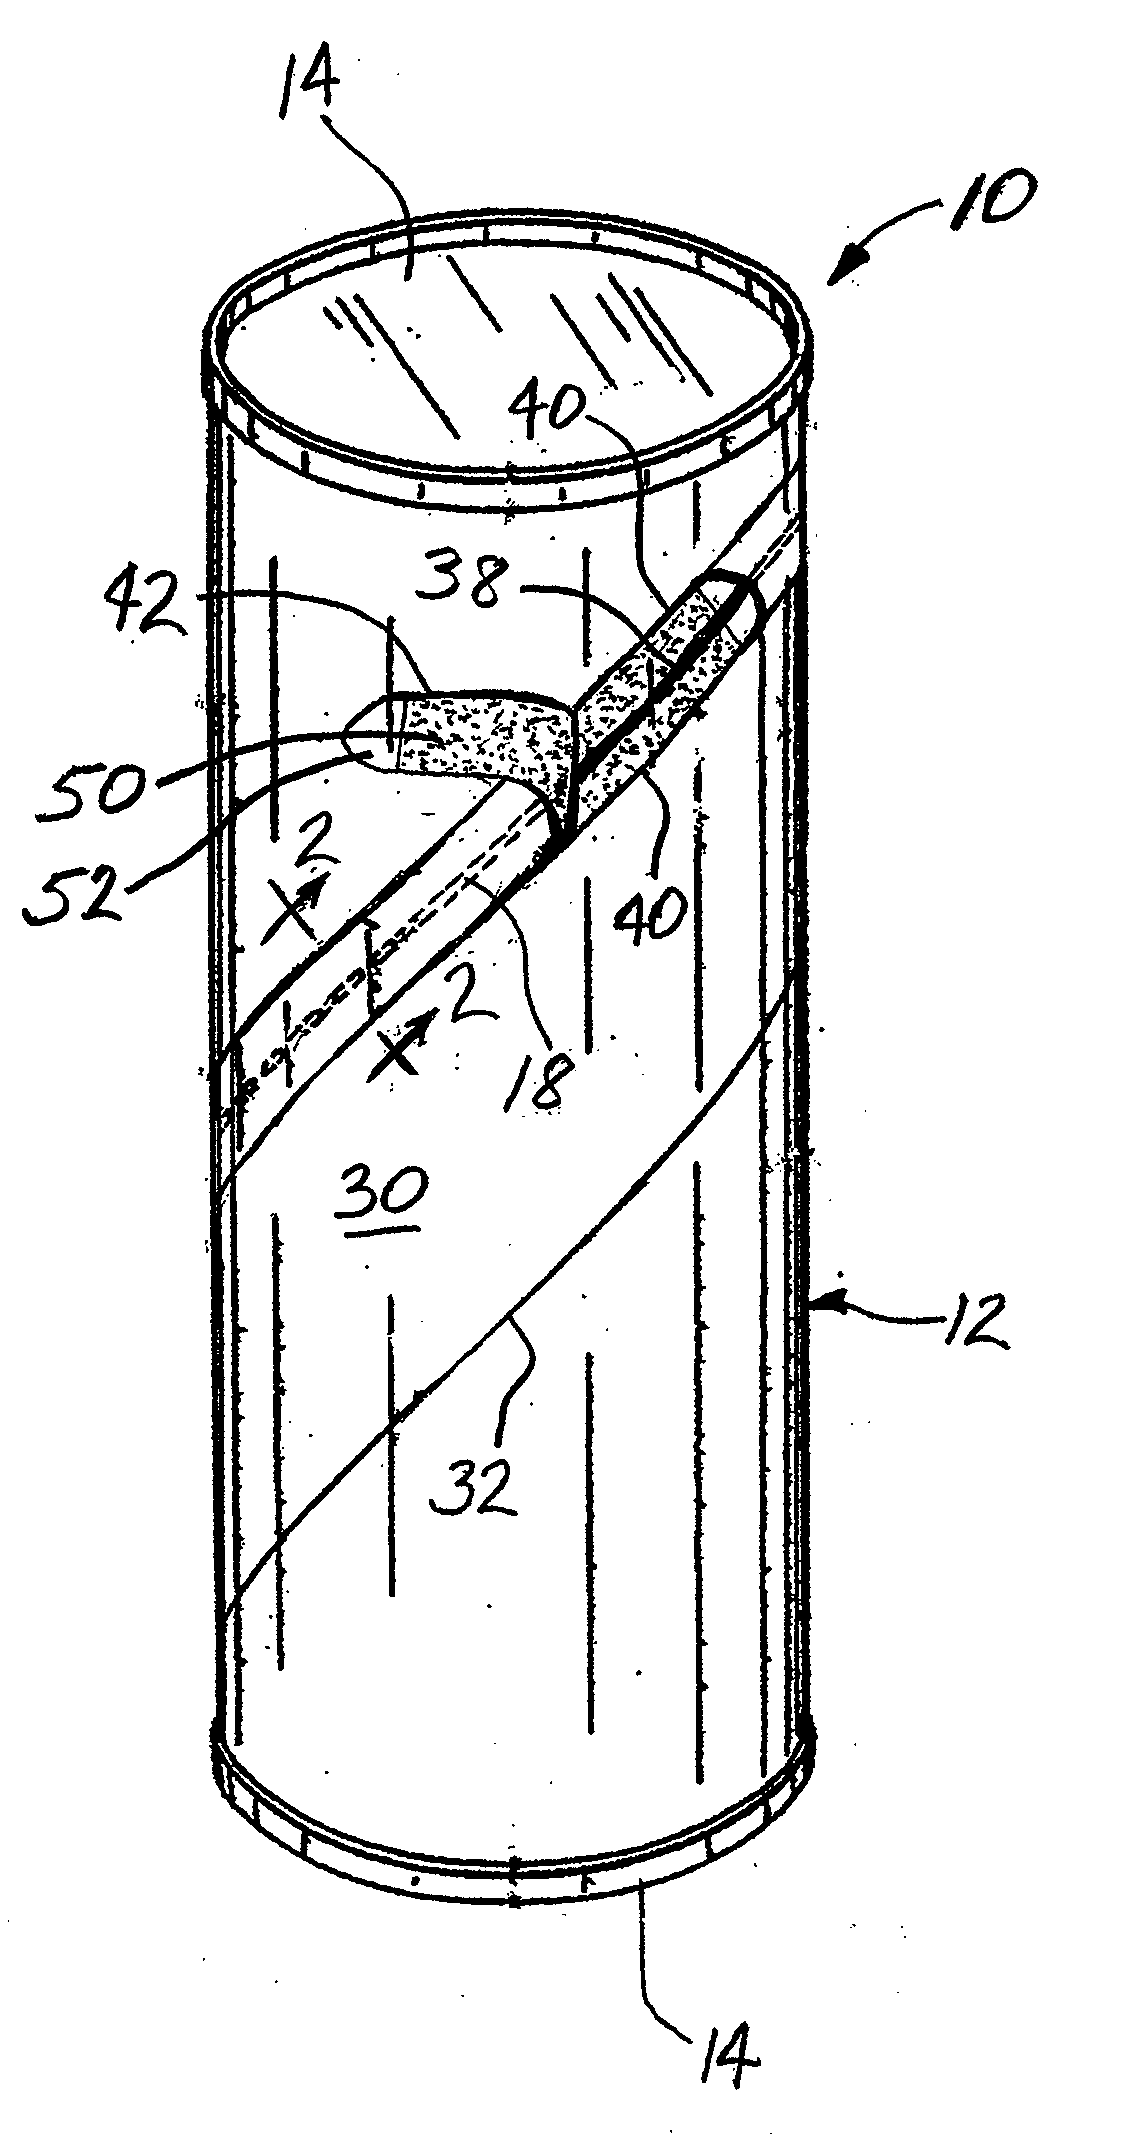 Composite Container with Integrated Easy-Open Feature